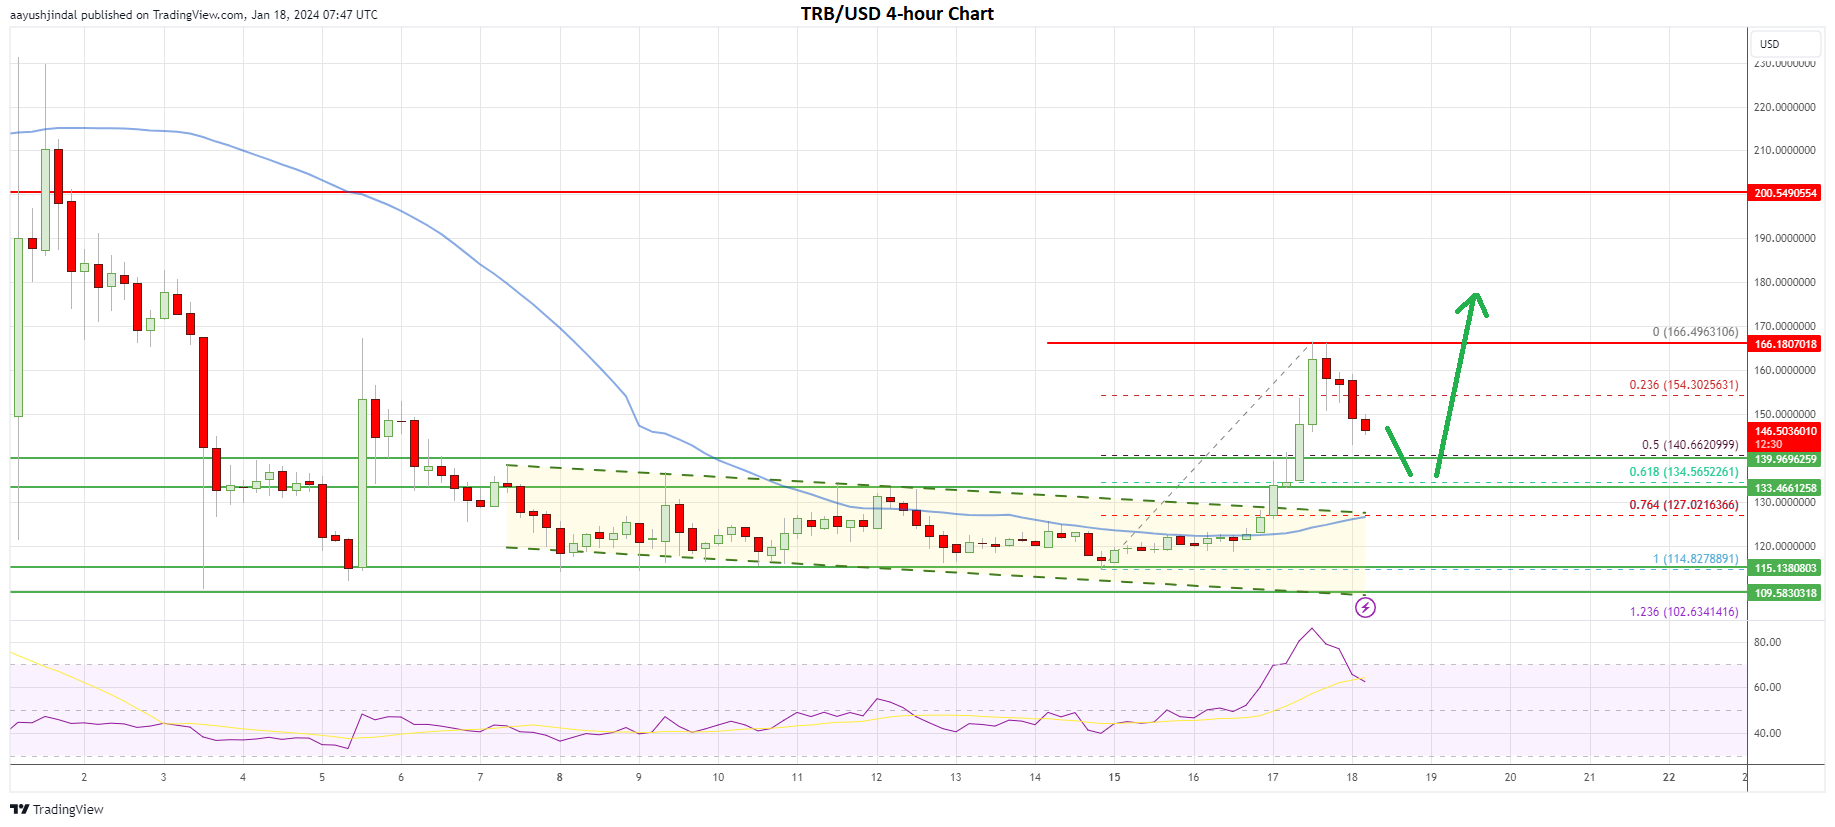 Tellor price 4-hour chart | Source: TRB/USD on TradingView.com